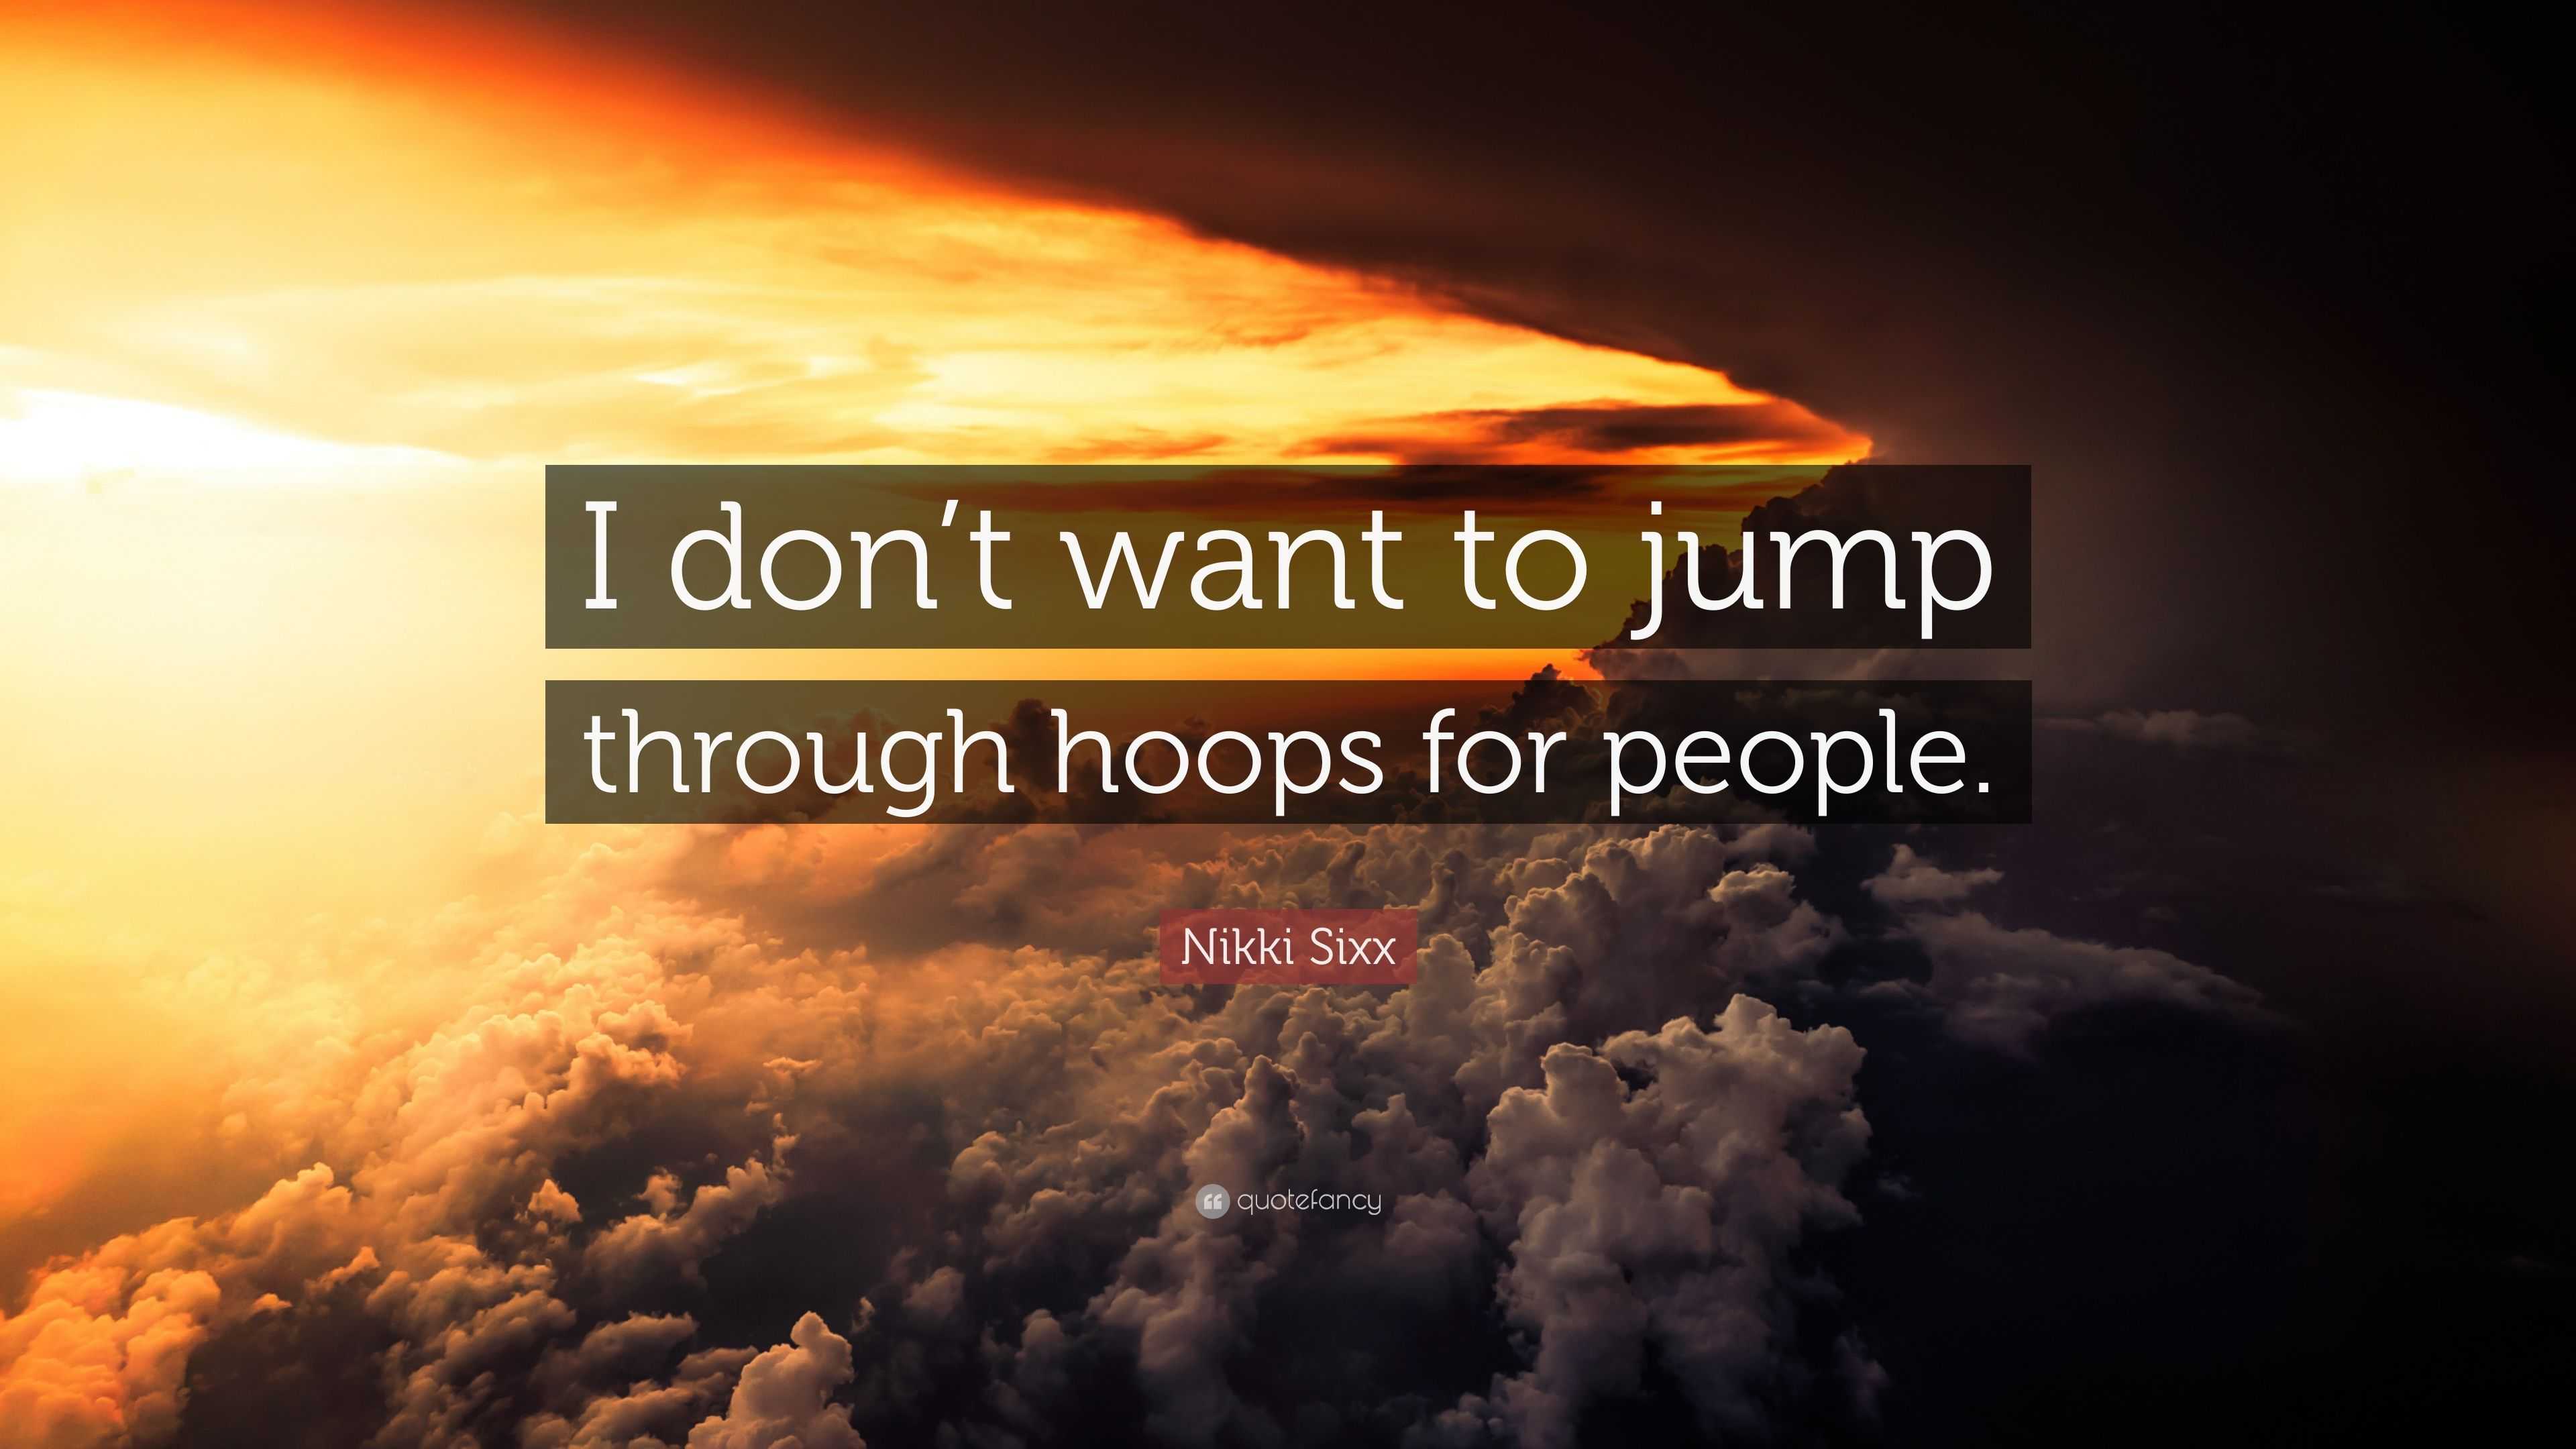 Nikki Sixx Quote: “I don’t want to jump through hoops for people.”